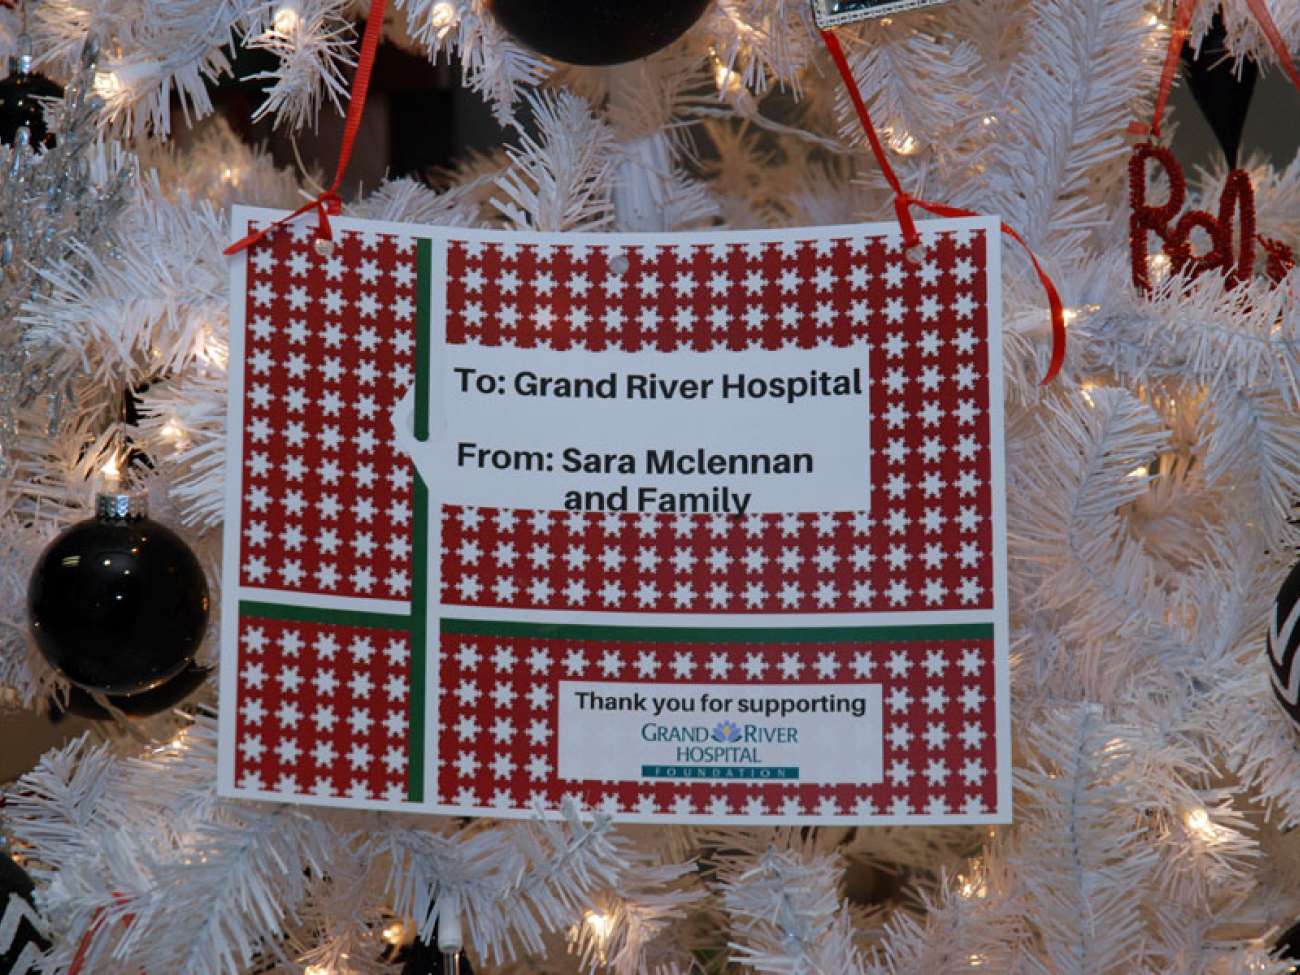 A credit tag for the tree.